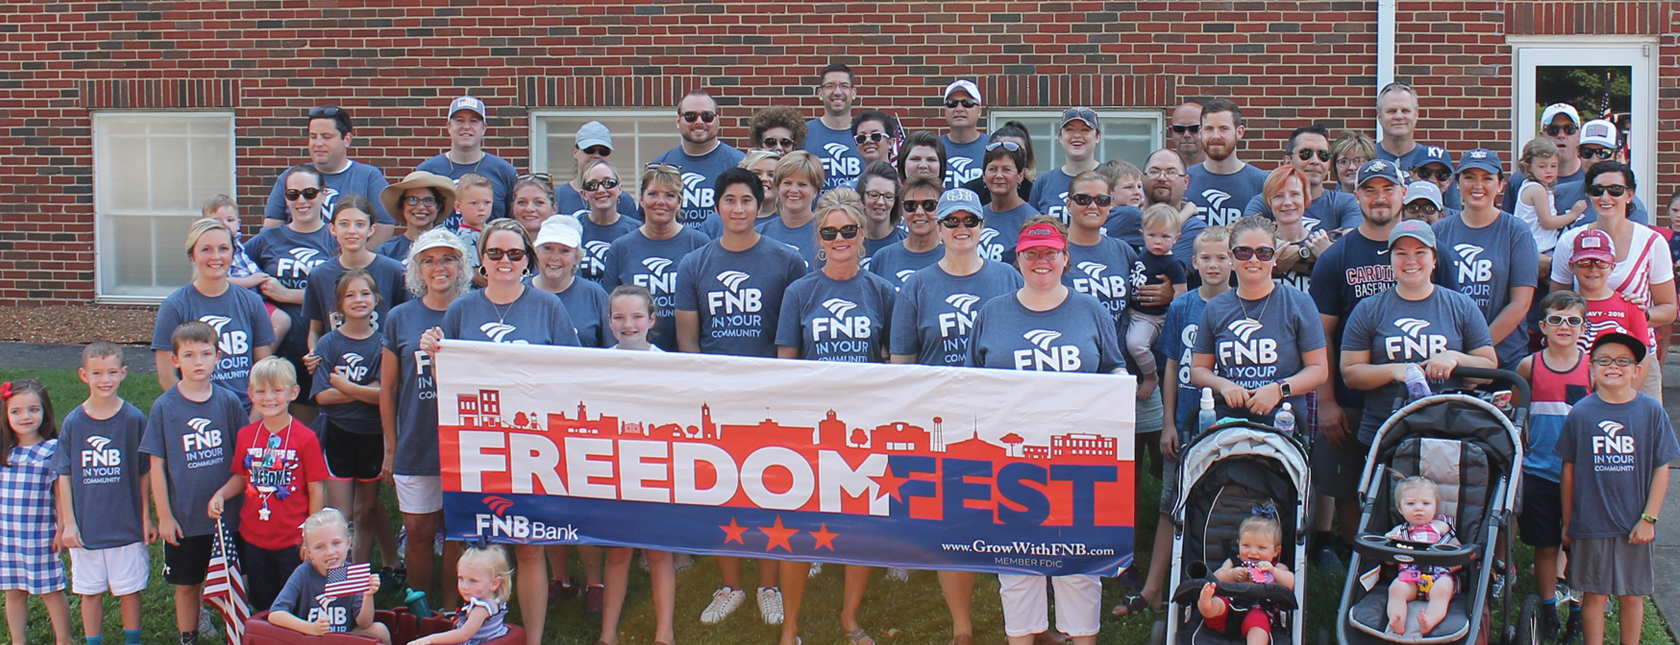 FNB Freedom Fest Parade takes place on Thursday, July 4th